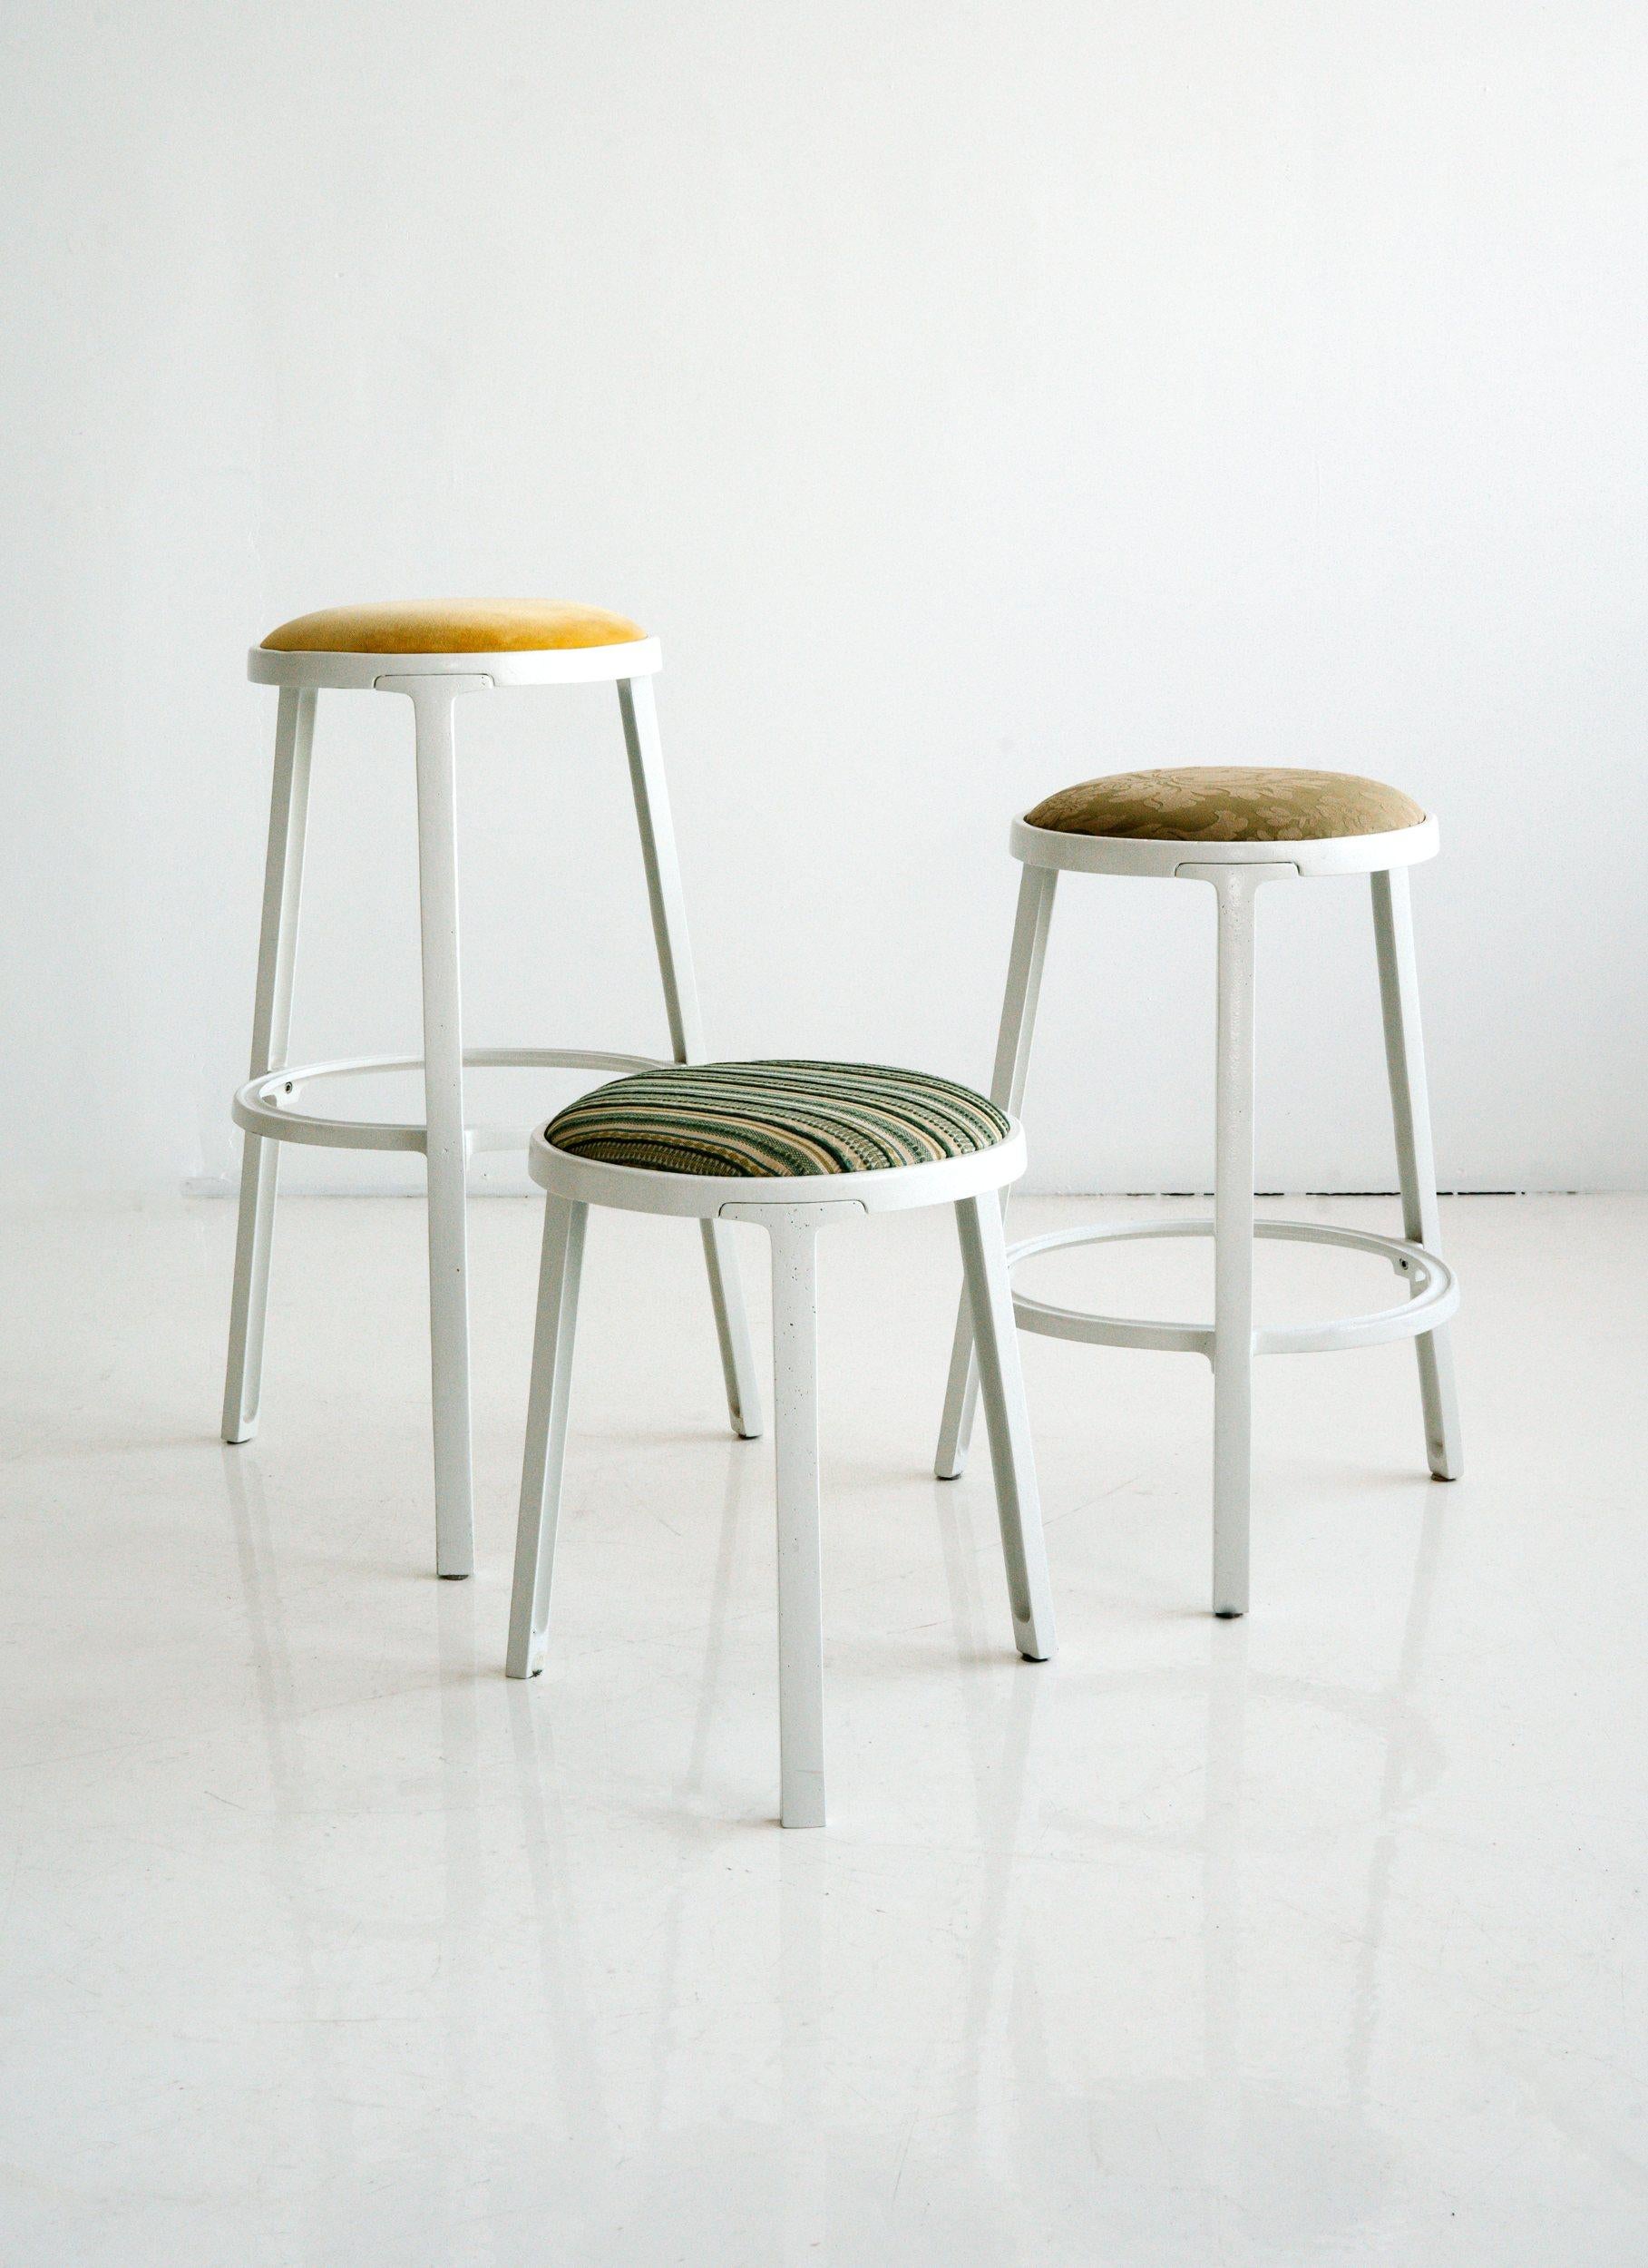 This stool features cast aluminum construction and can use customer's own material for upholstery.

Founded in 2011, AKMD developed out of a thirteen-year friendship and design collaboration between Ayush Kasliwal and Mike Dreeben.

The two met in